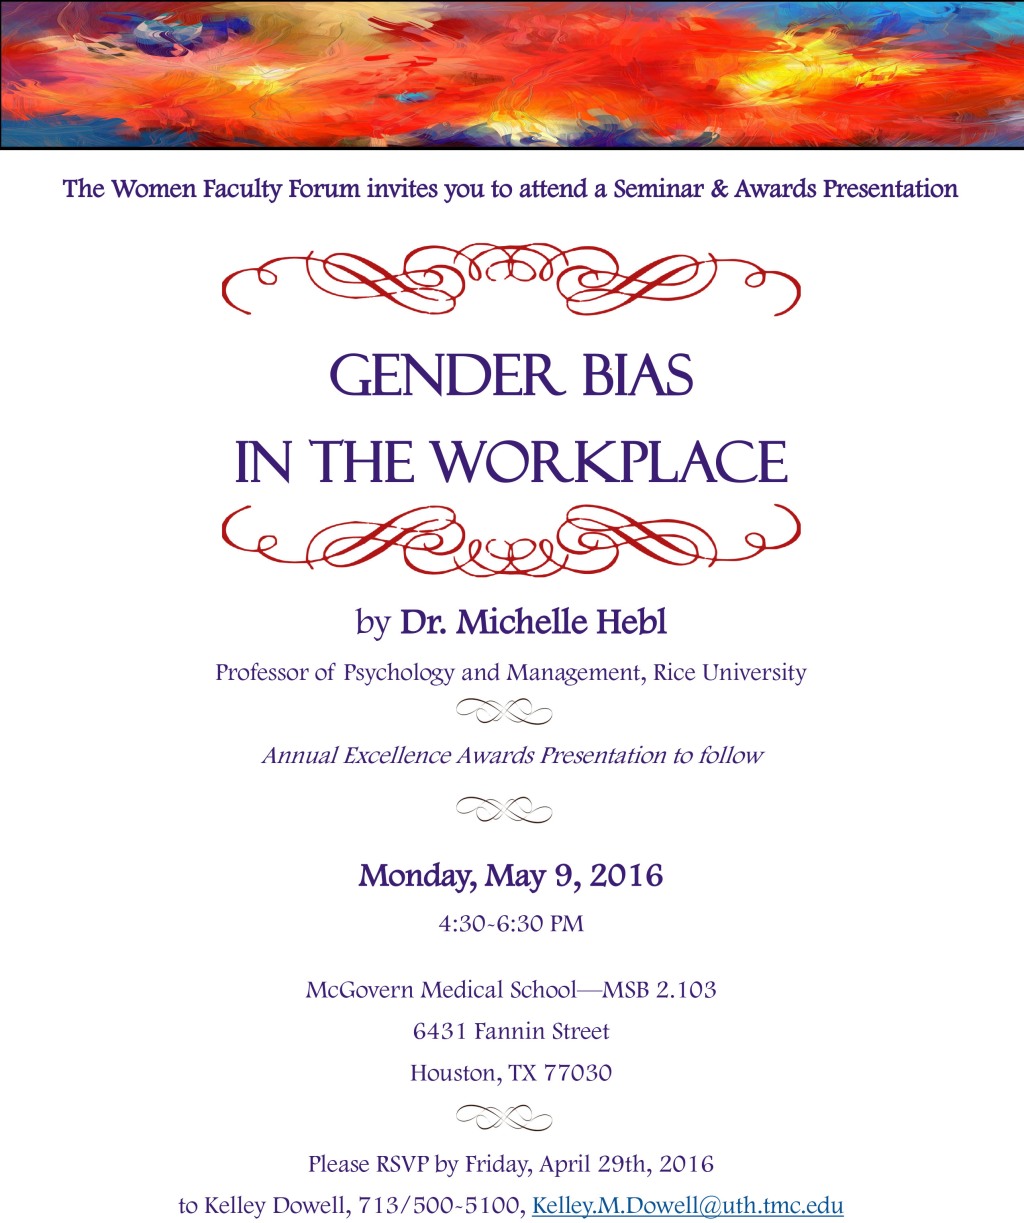 UTHealth Women Faculty Forum presents “Gender Bias in the Workplace”